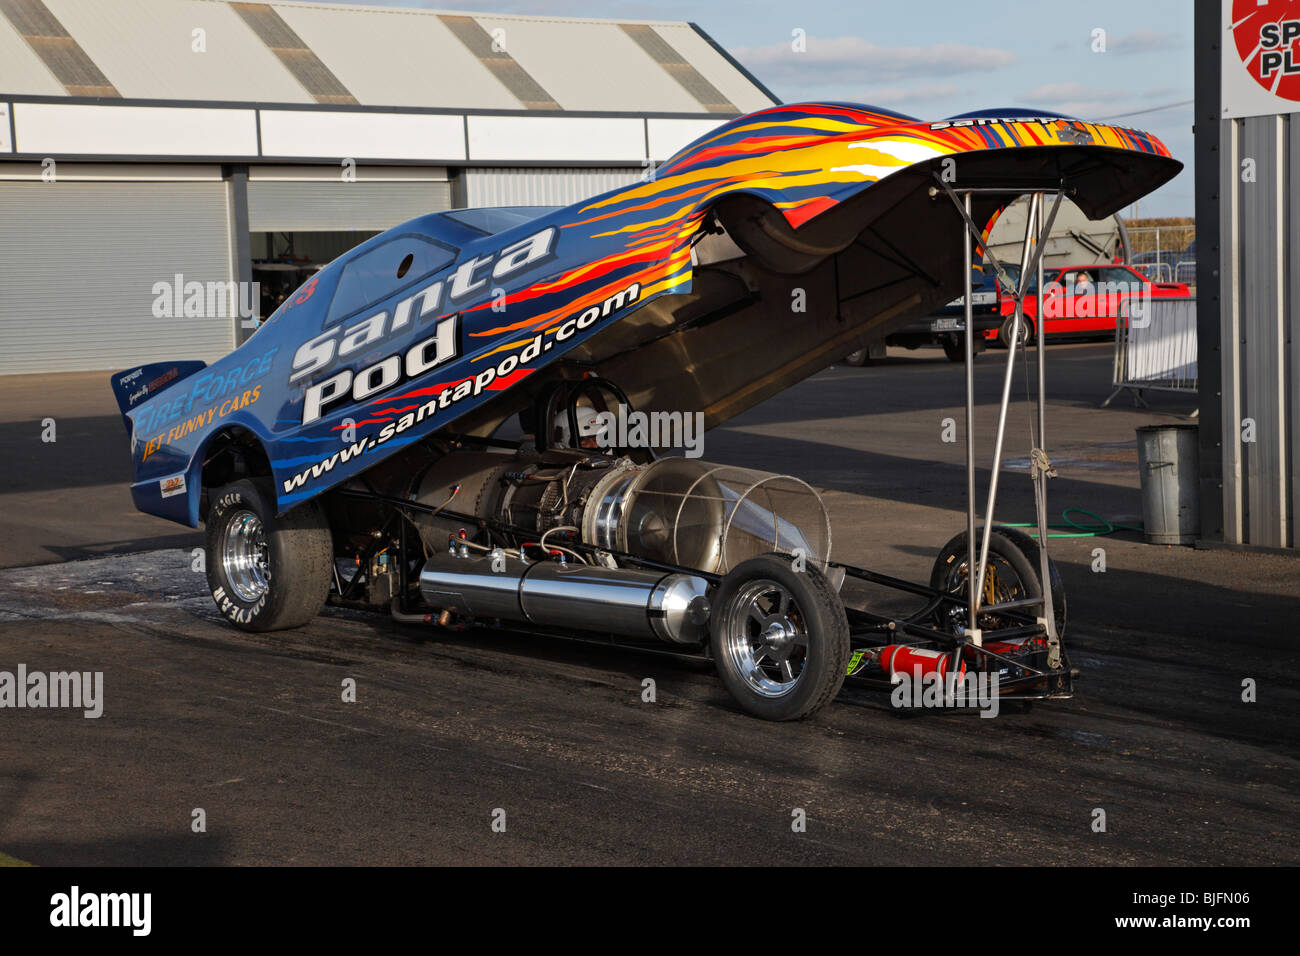 Fireforce jet powered funny car driven by Martin Hill. Stock Photo